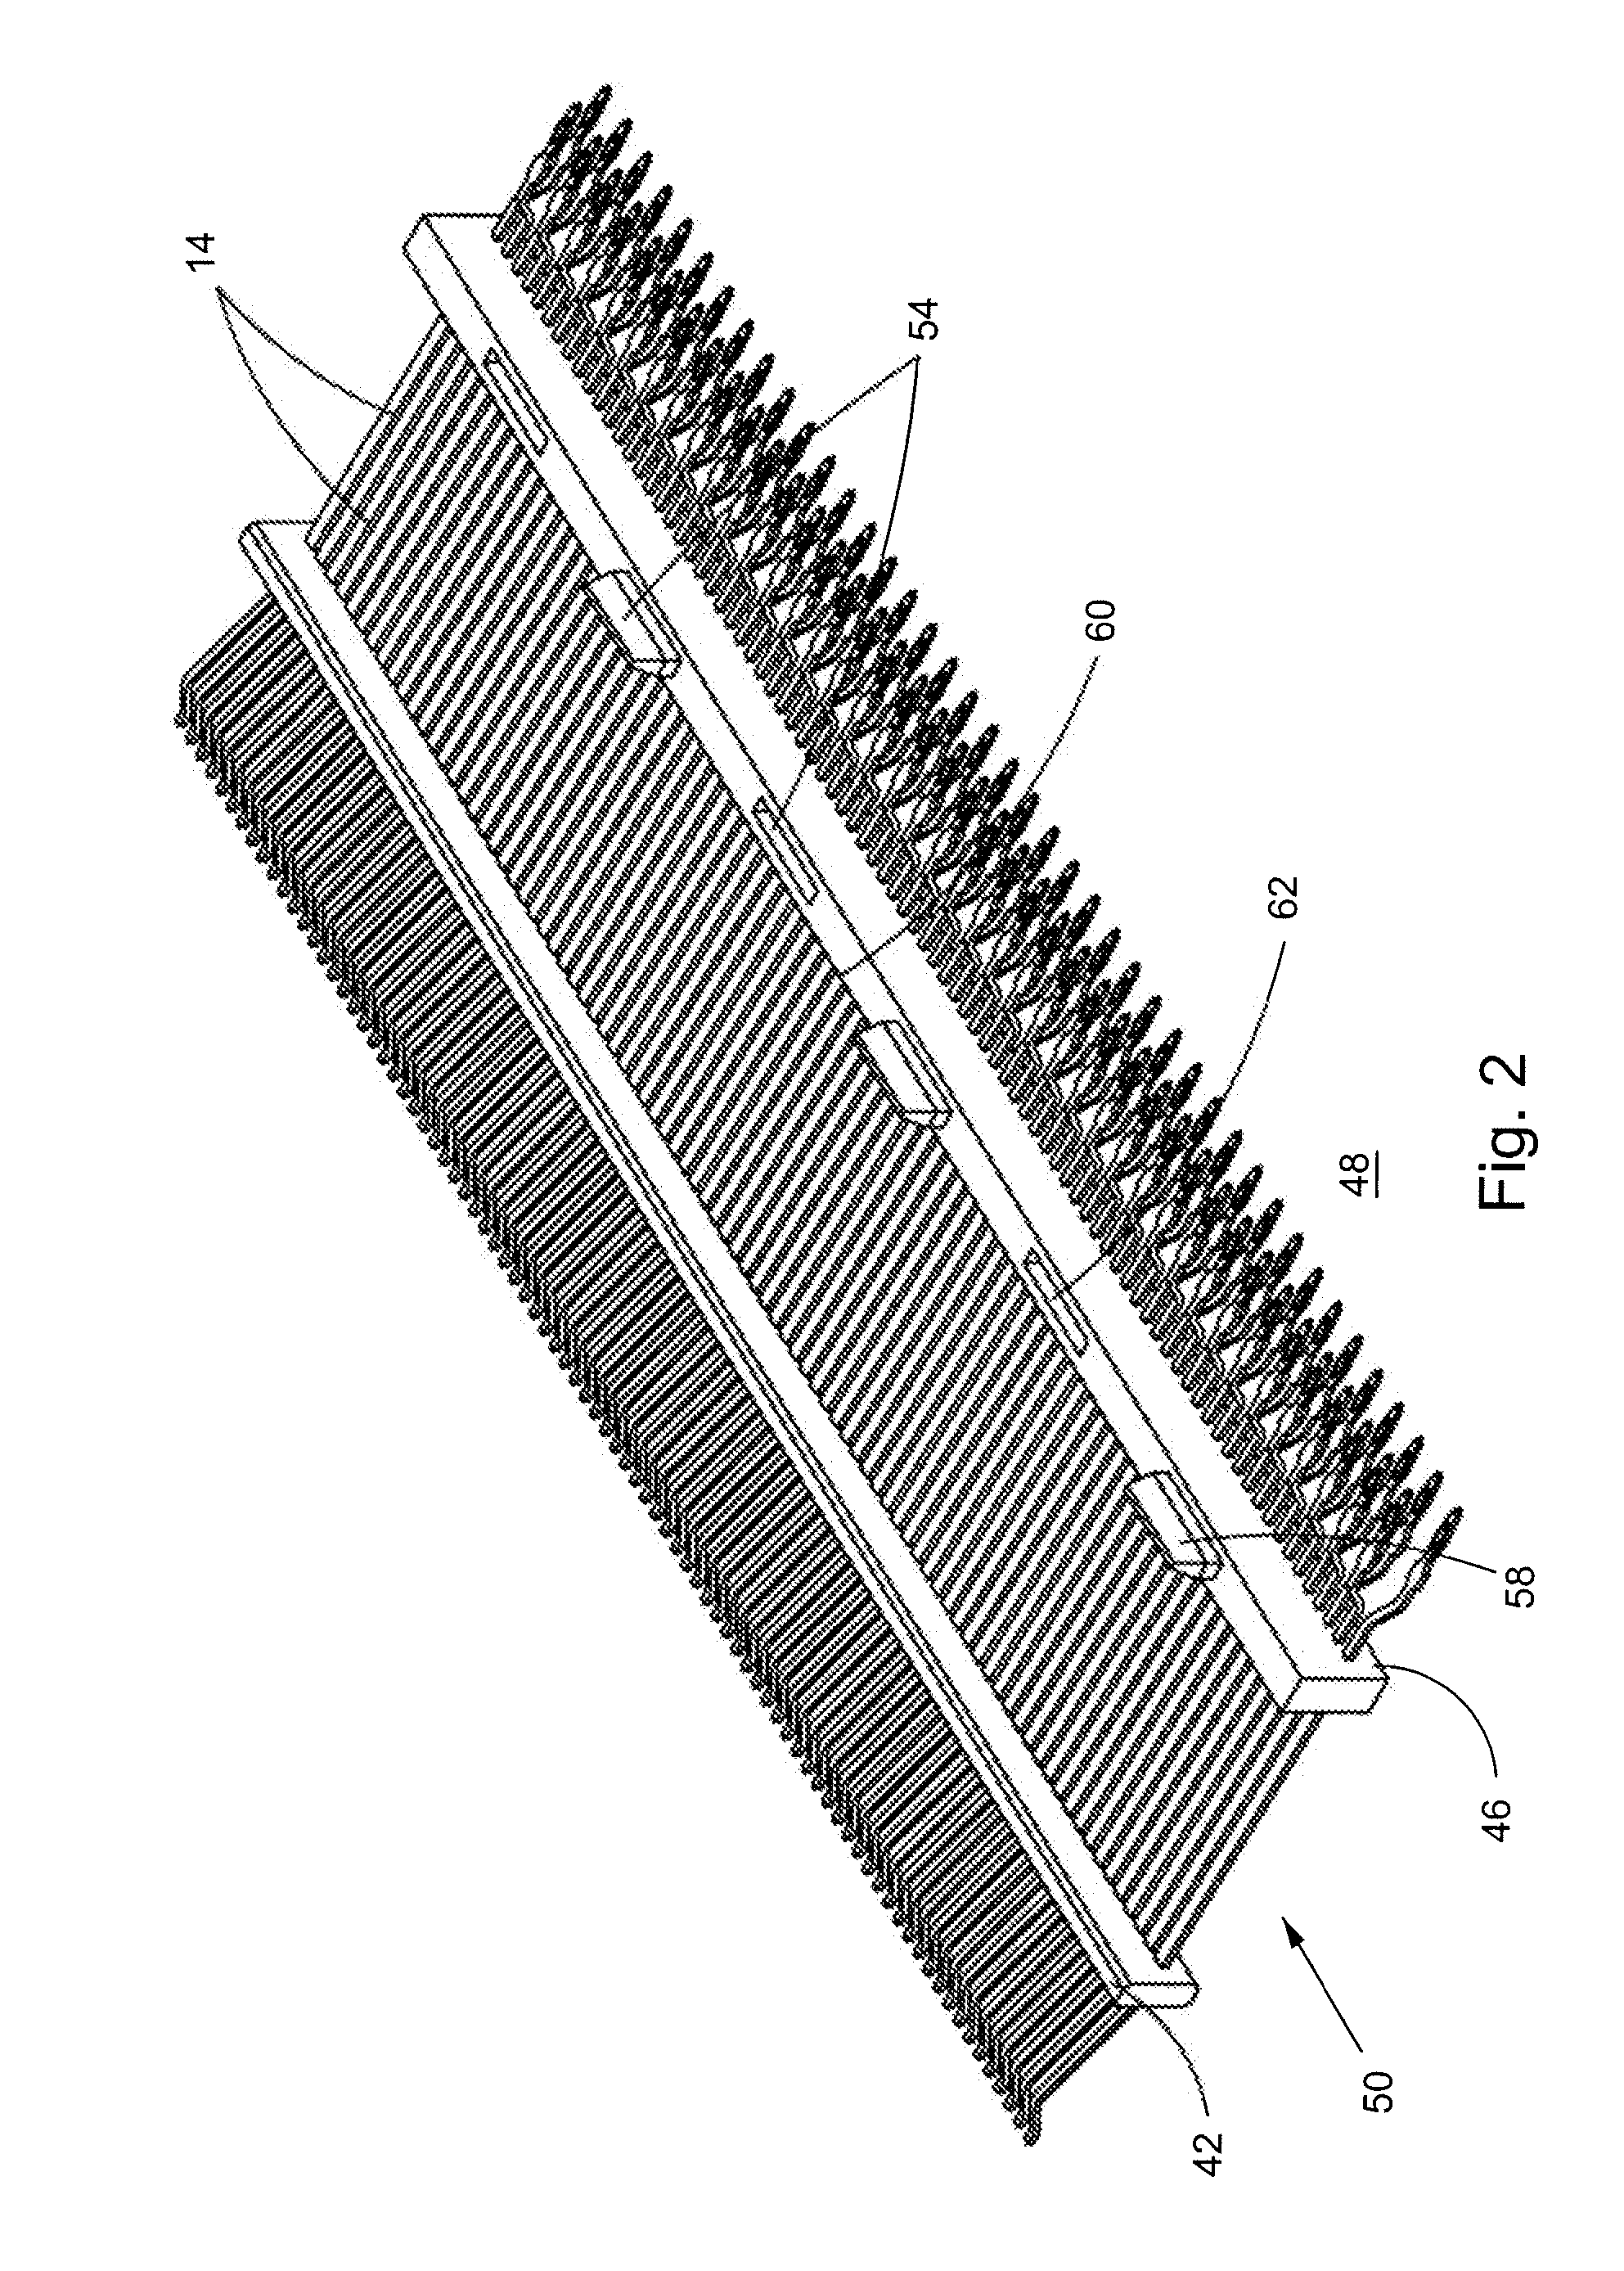 Overmolded Electrical Contact Array